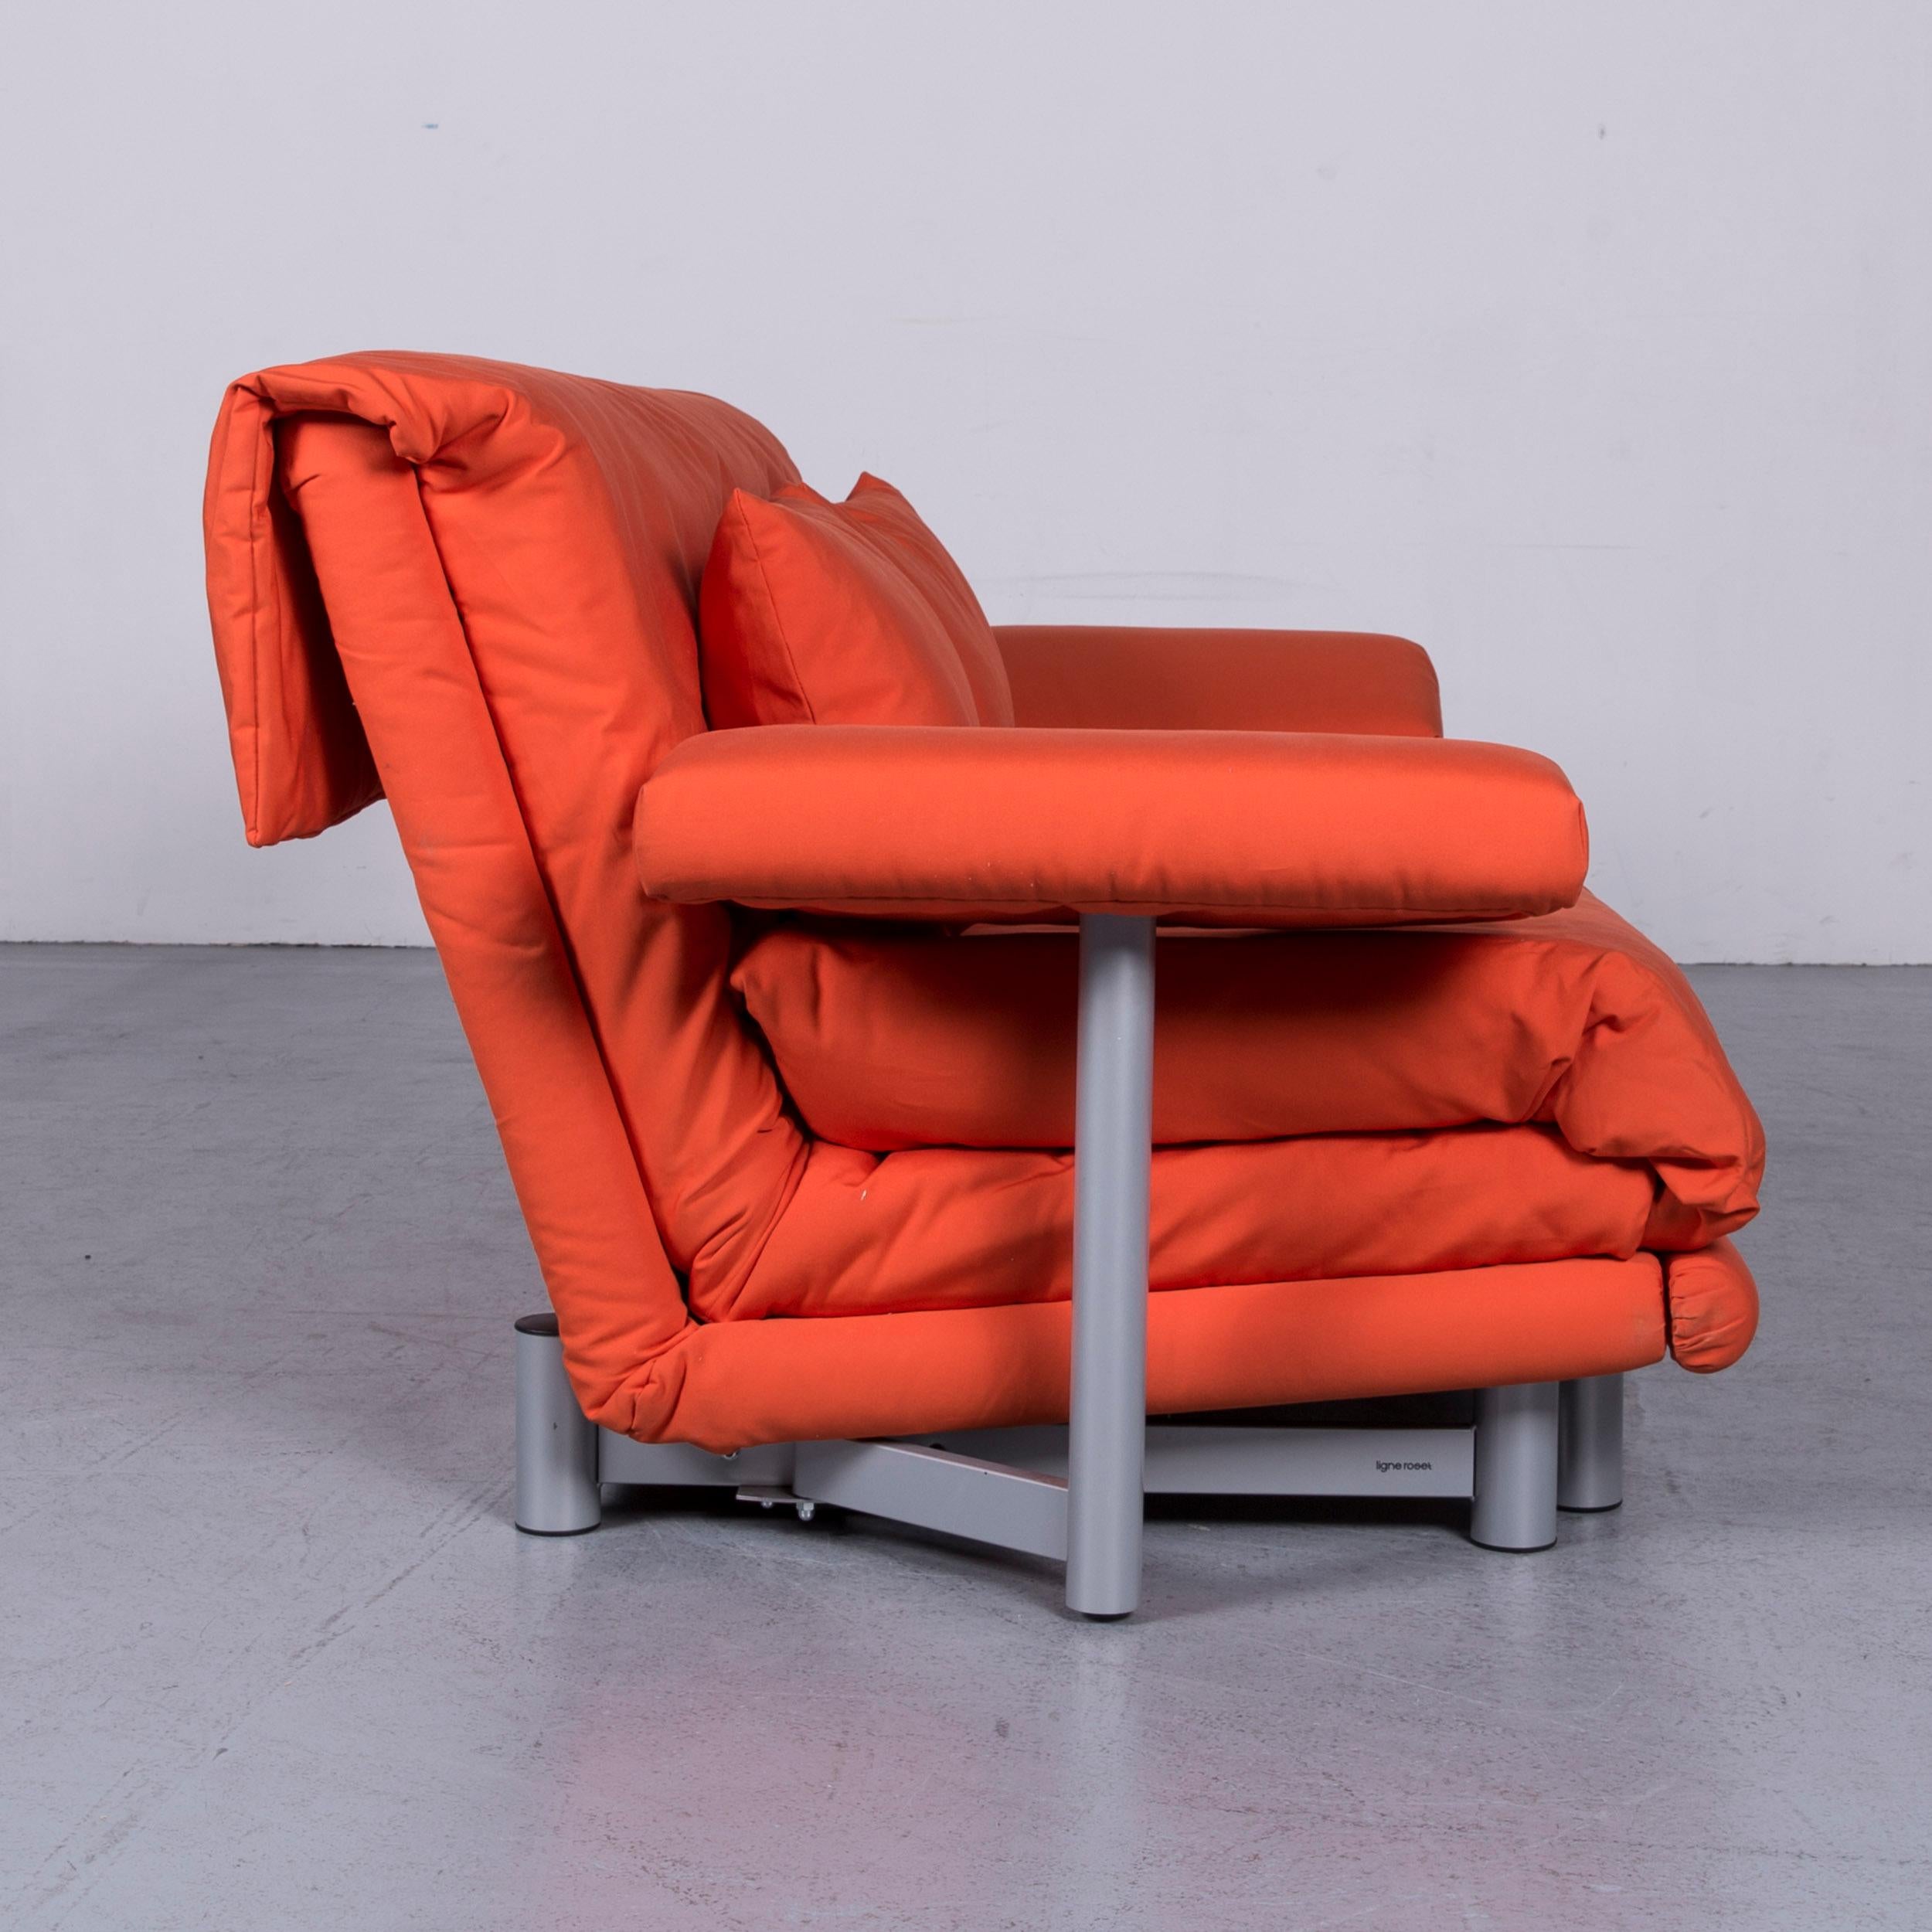 Ligne Roset Multy Fabric Sofa-Bed Orange Two-Seat Couch Sleep Function 5